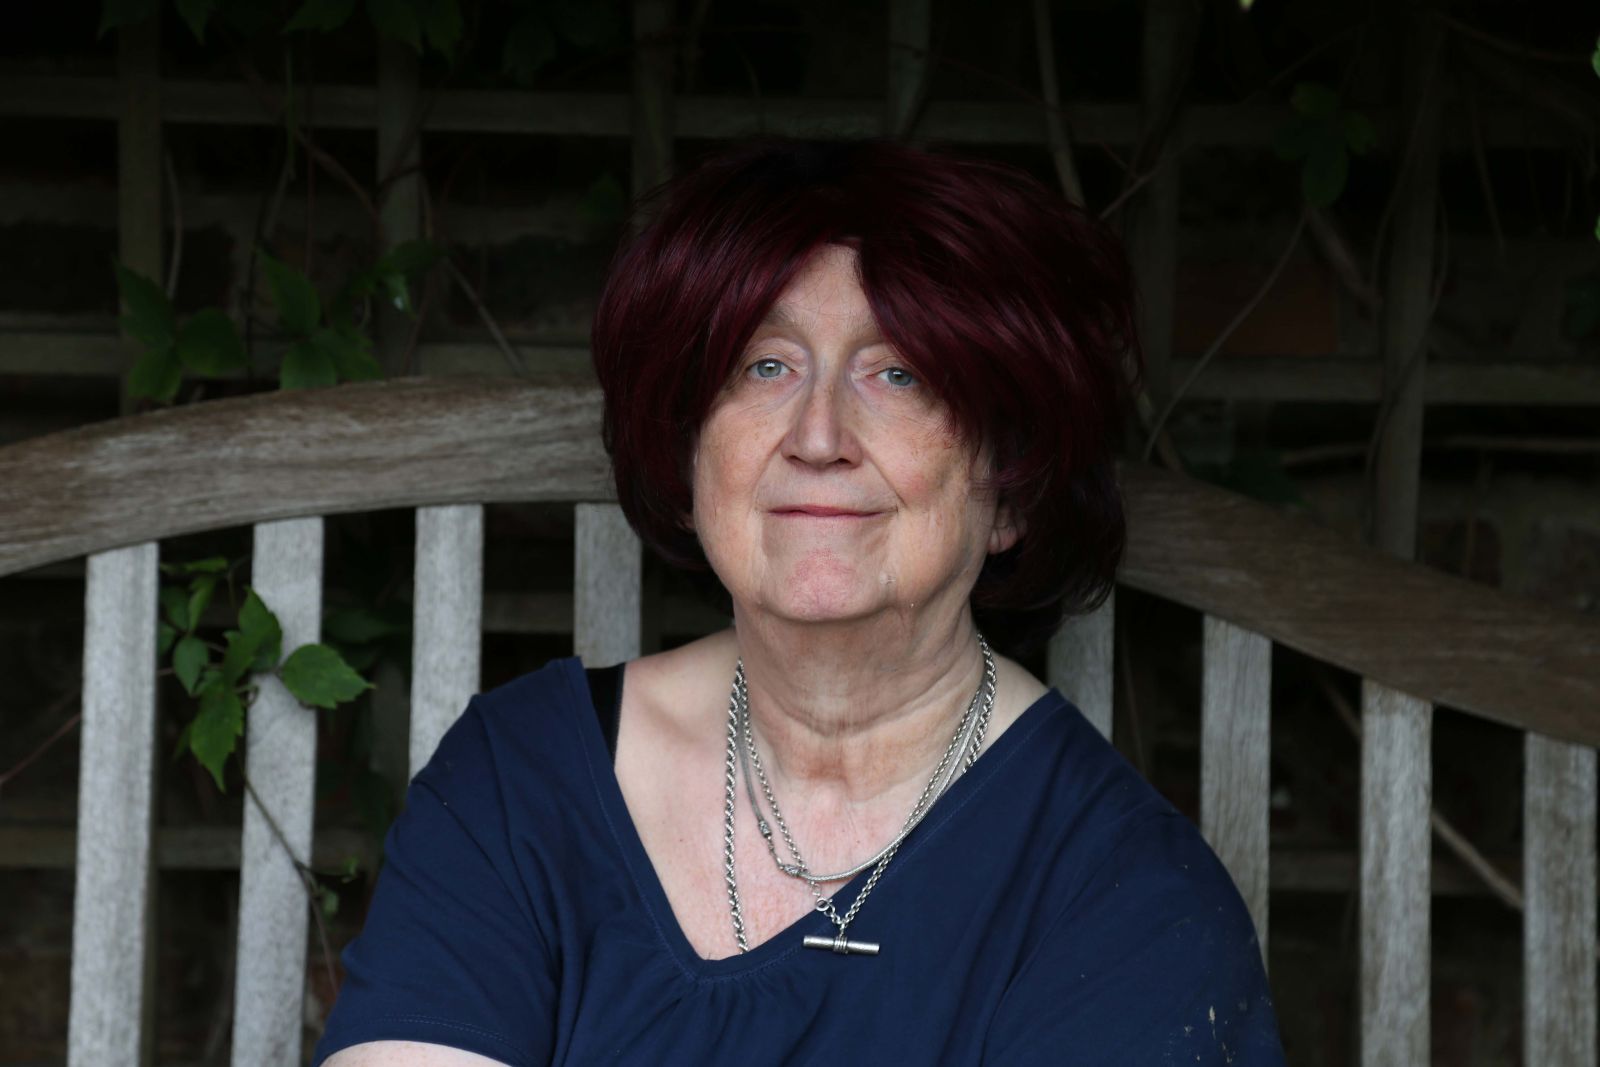 Portrait photograph of the poet Roz Kaveney wearing a blue v-necked top and silver necklaces